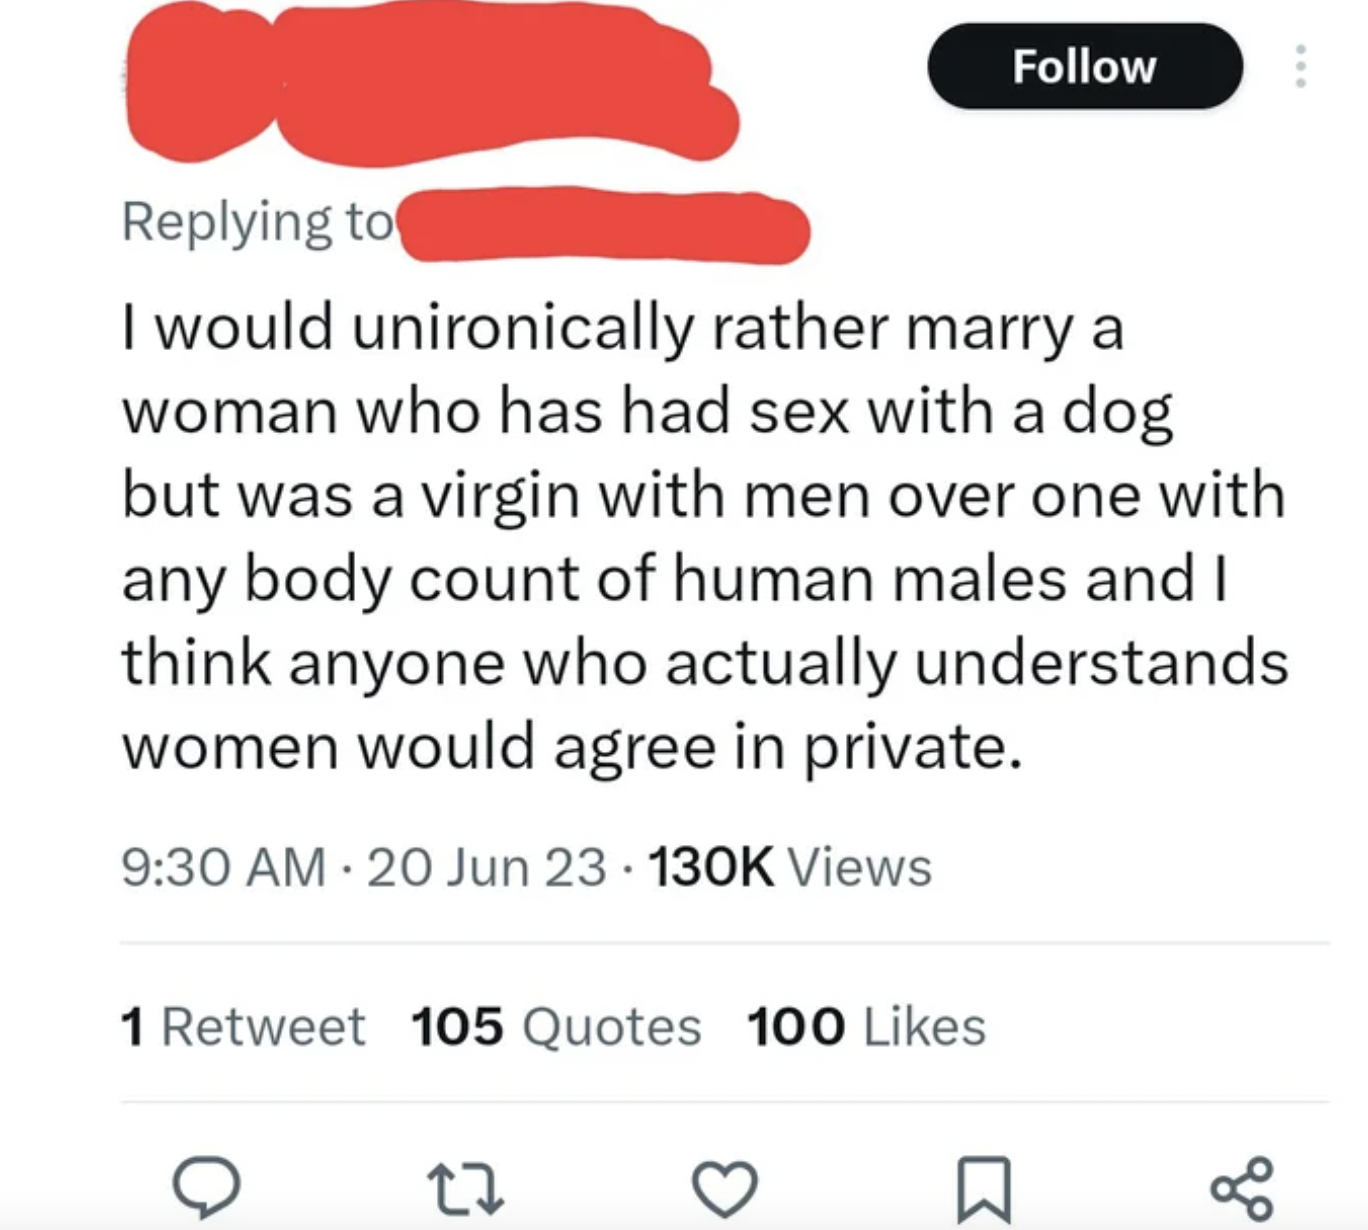 insane people on facebook - document - I would unironically rather marry a woman who has had sex with a dog but was a virgin with men over one with any body count of human males and I think anyone who actually understands women would agree in private. 20 